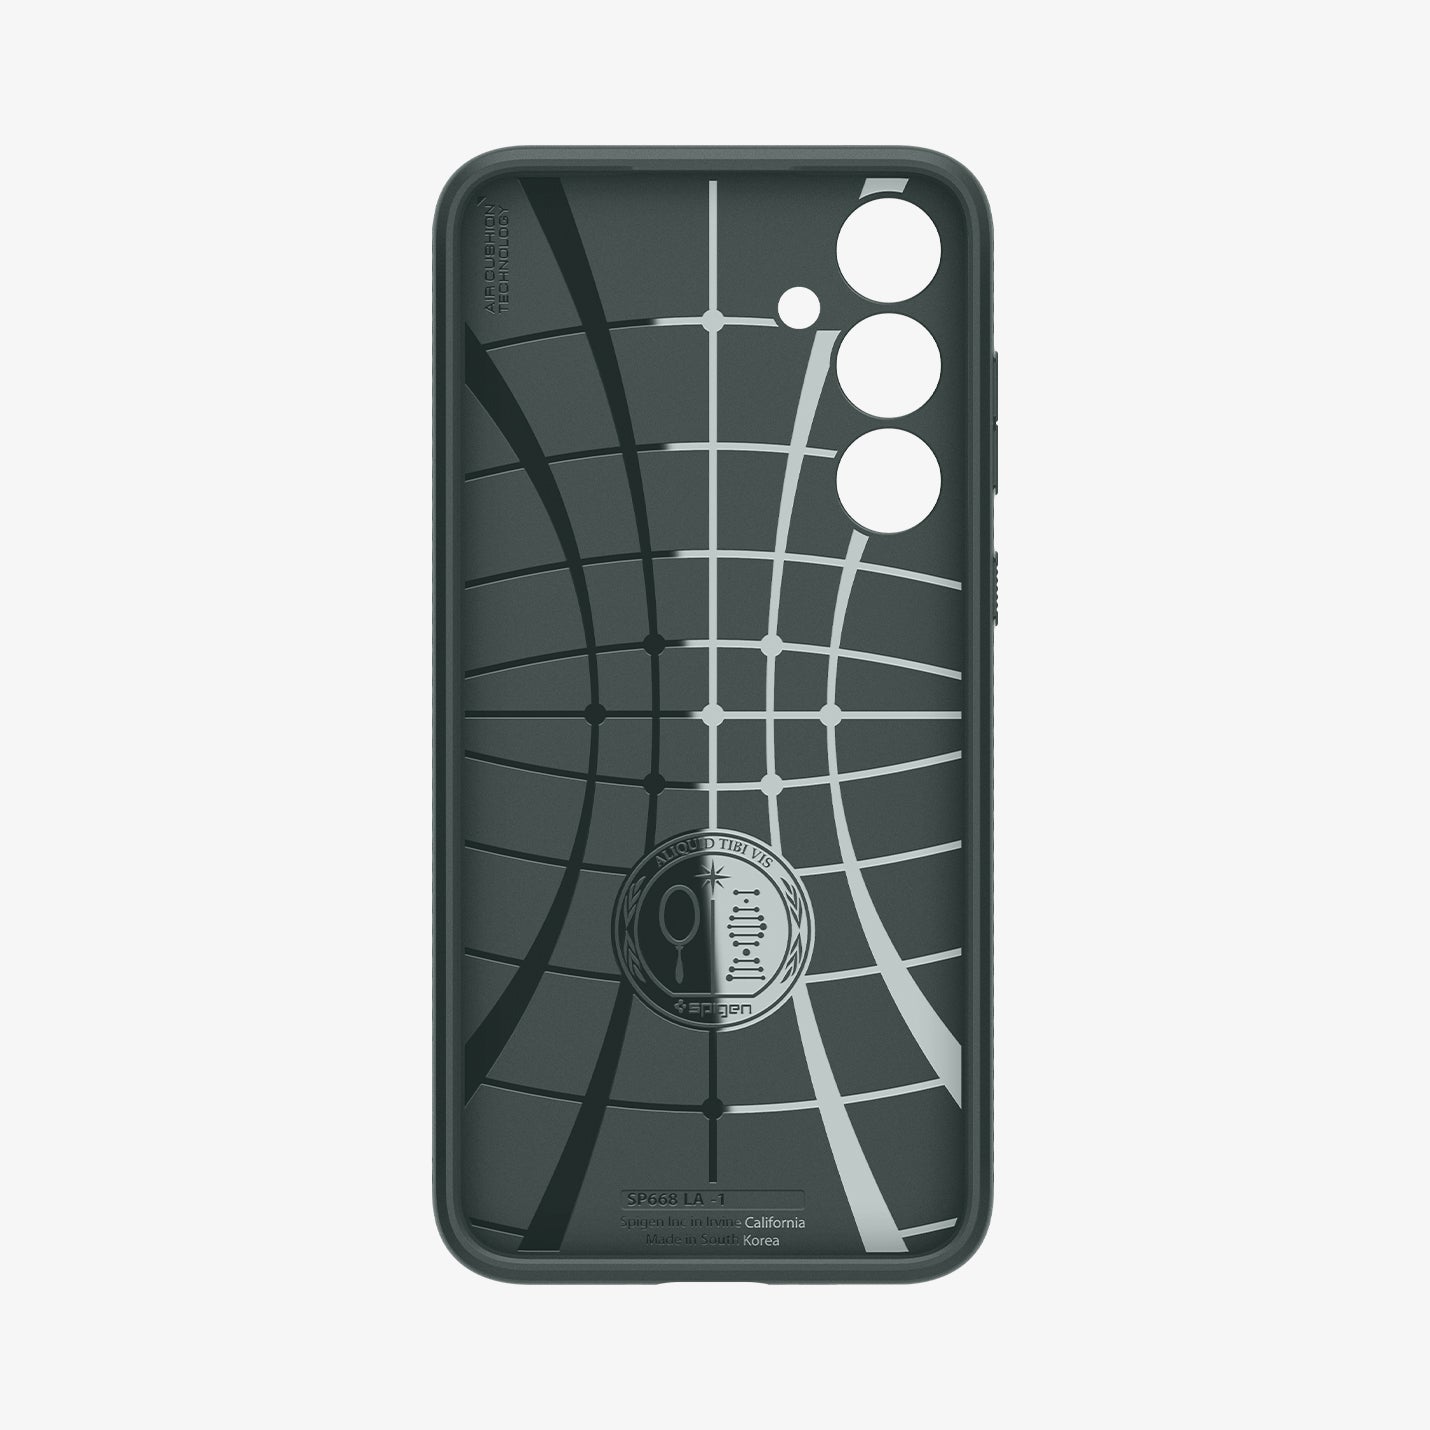 ACS07520 - Galaxy A35 5G Case Liquid Air in Abyss Green showing the inner case with spider web pattern